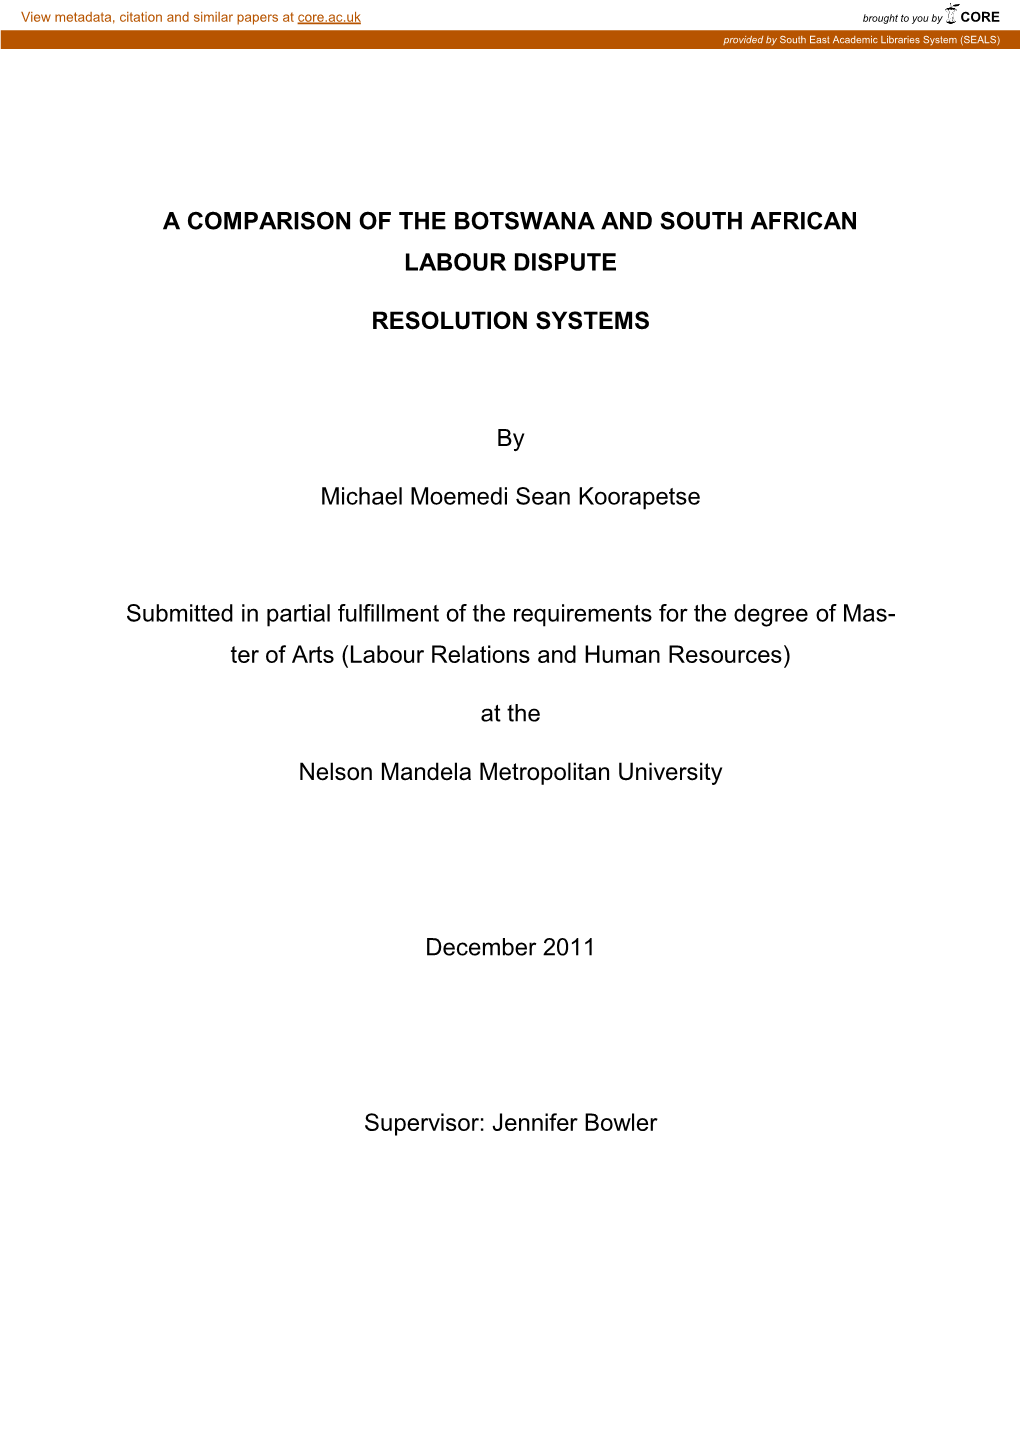 A Comparison of the Botswana and South African Labour Dispute